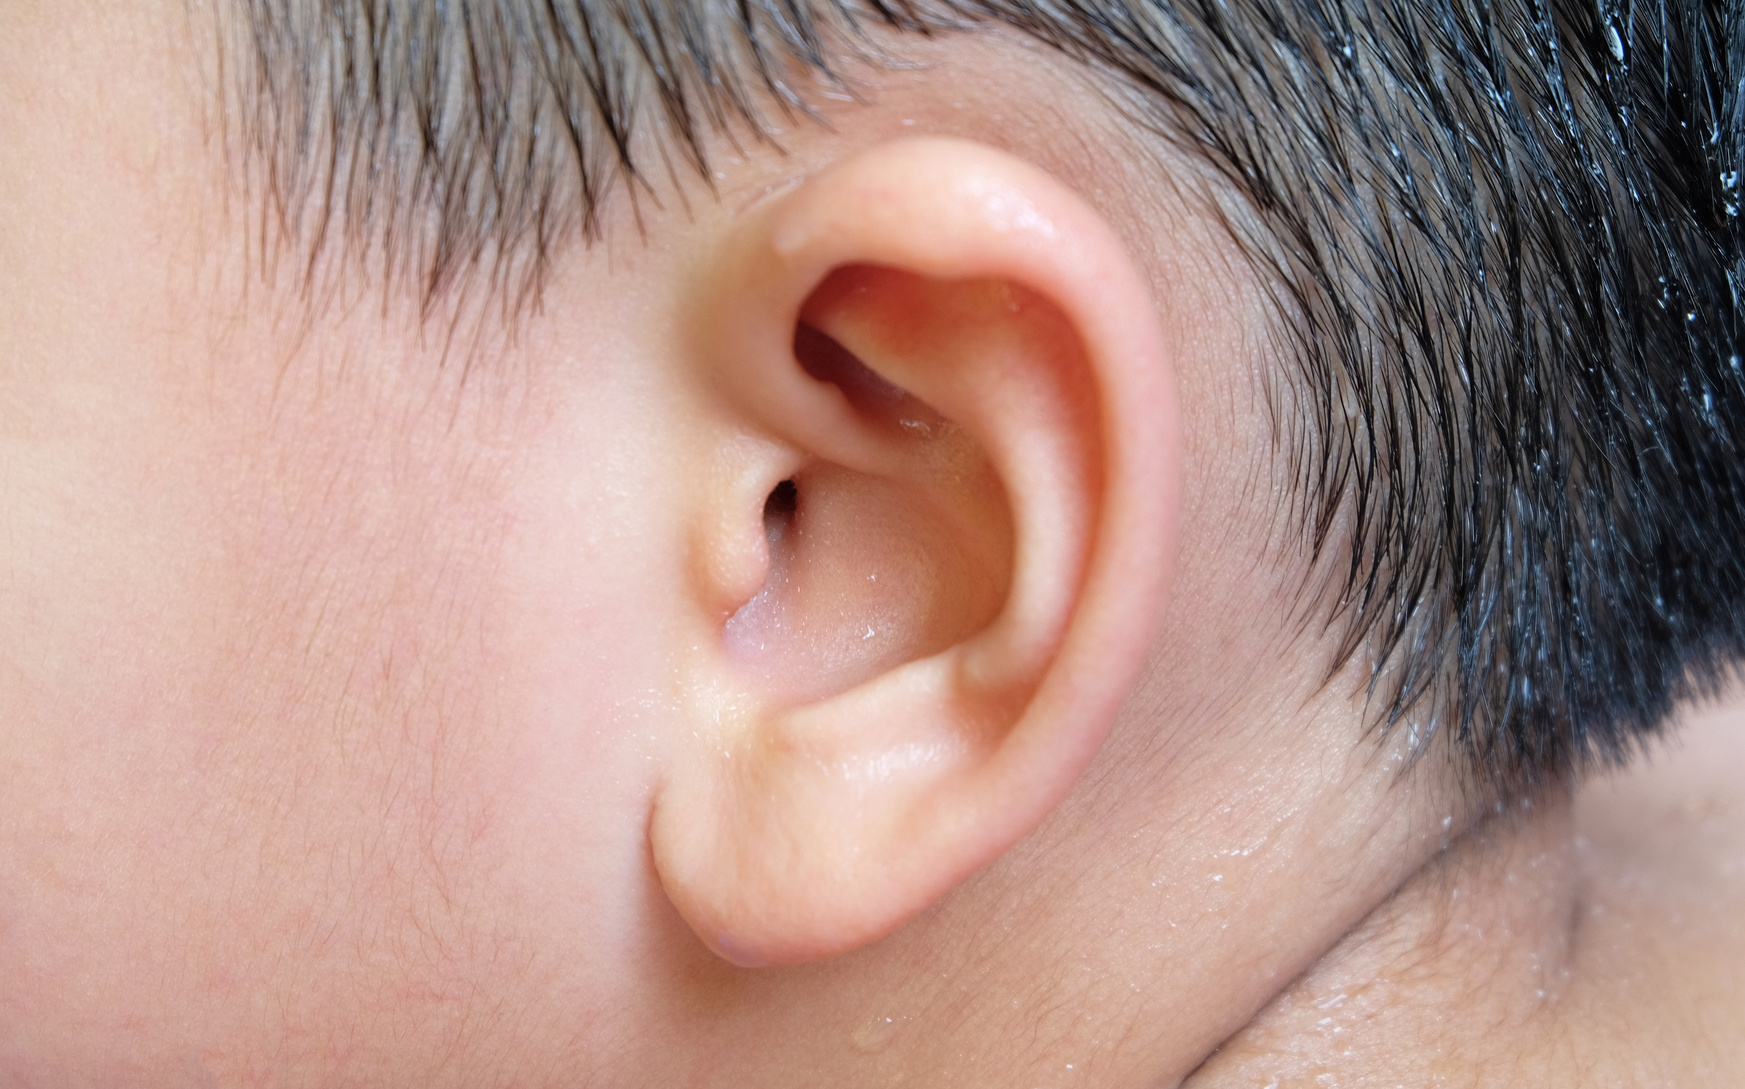 How To Make A Homemade Ear Wick Swimmer's Ear